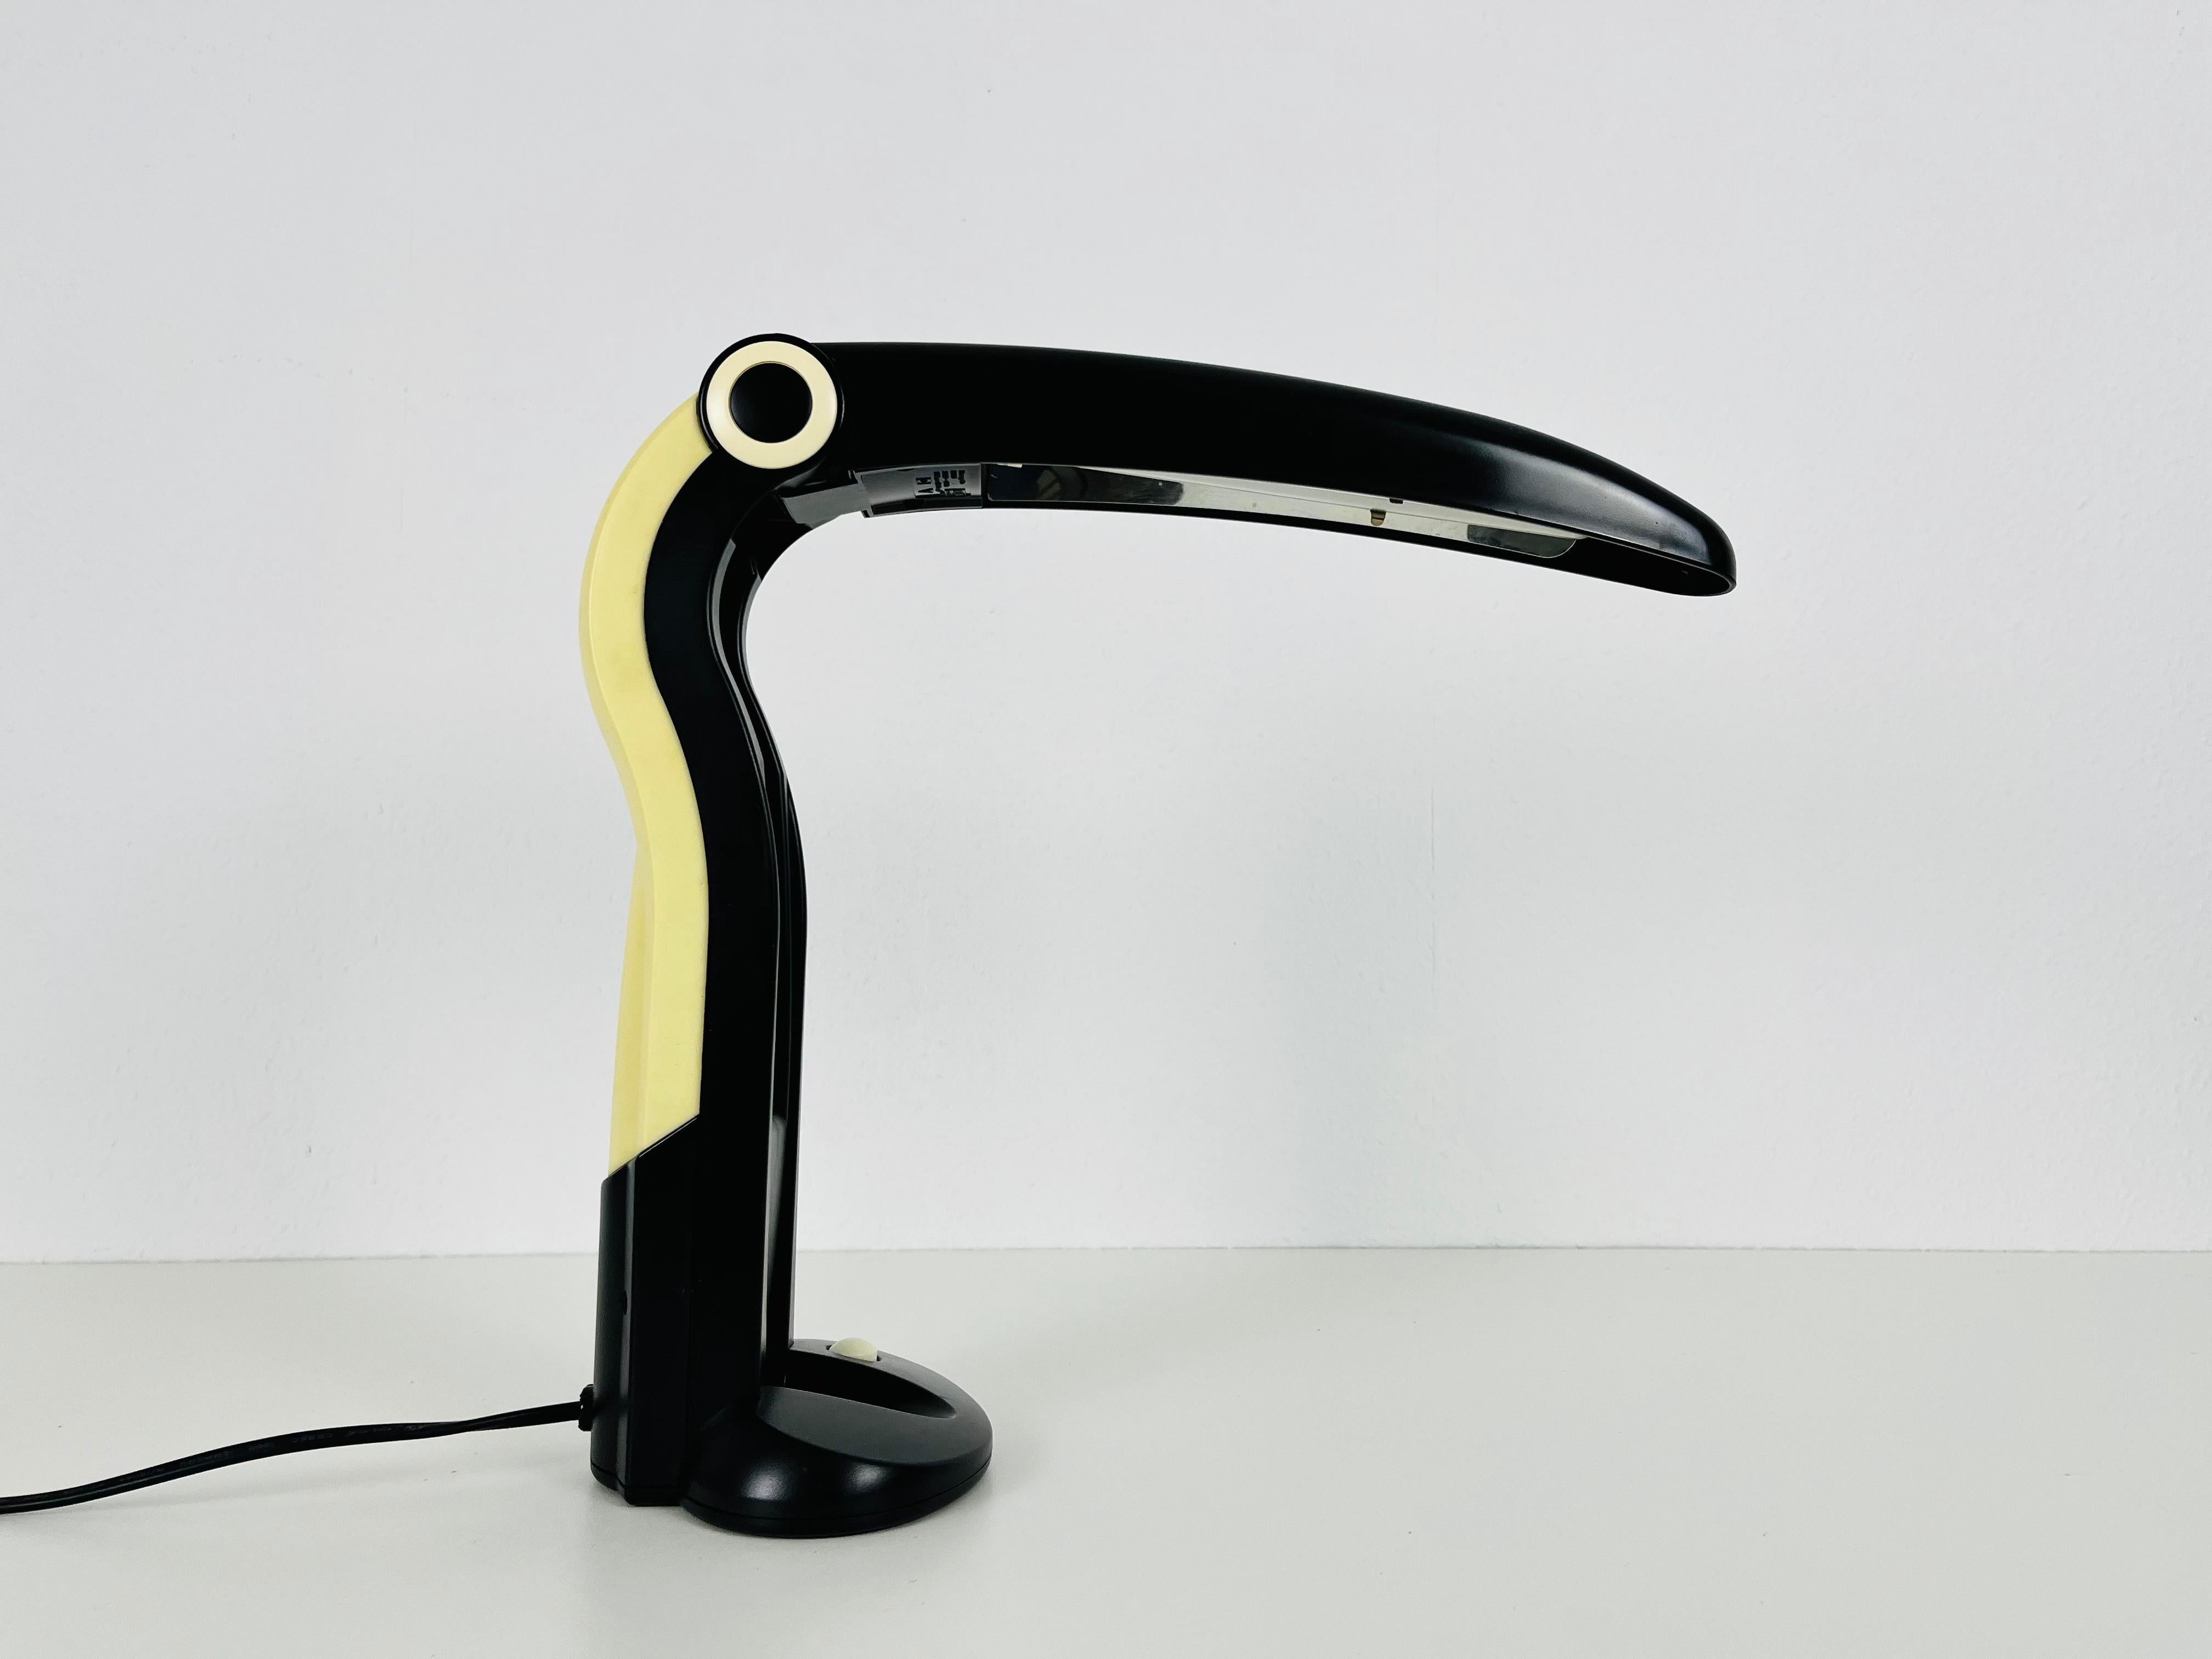 A beautiful table lamp designed by H.T. Huang for Huangslite in the 1990s. It is fascinating with its beautiful toucan design. The lamp is in a very good vintage condition and works perfectly. The head of the lamp is adjustable.

Free worldwide